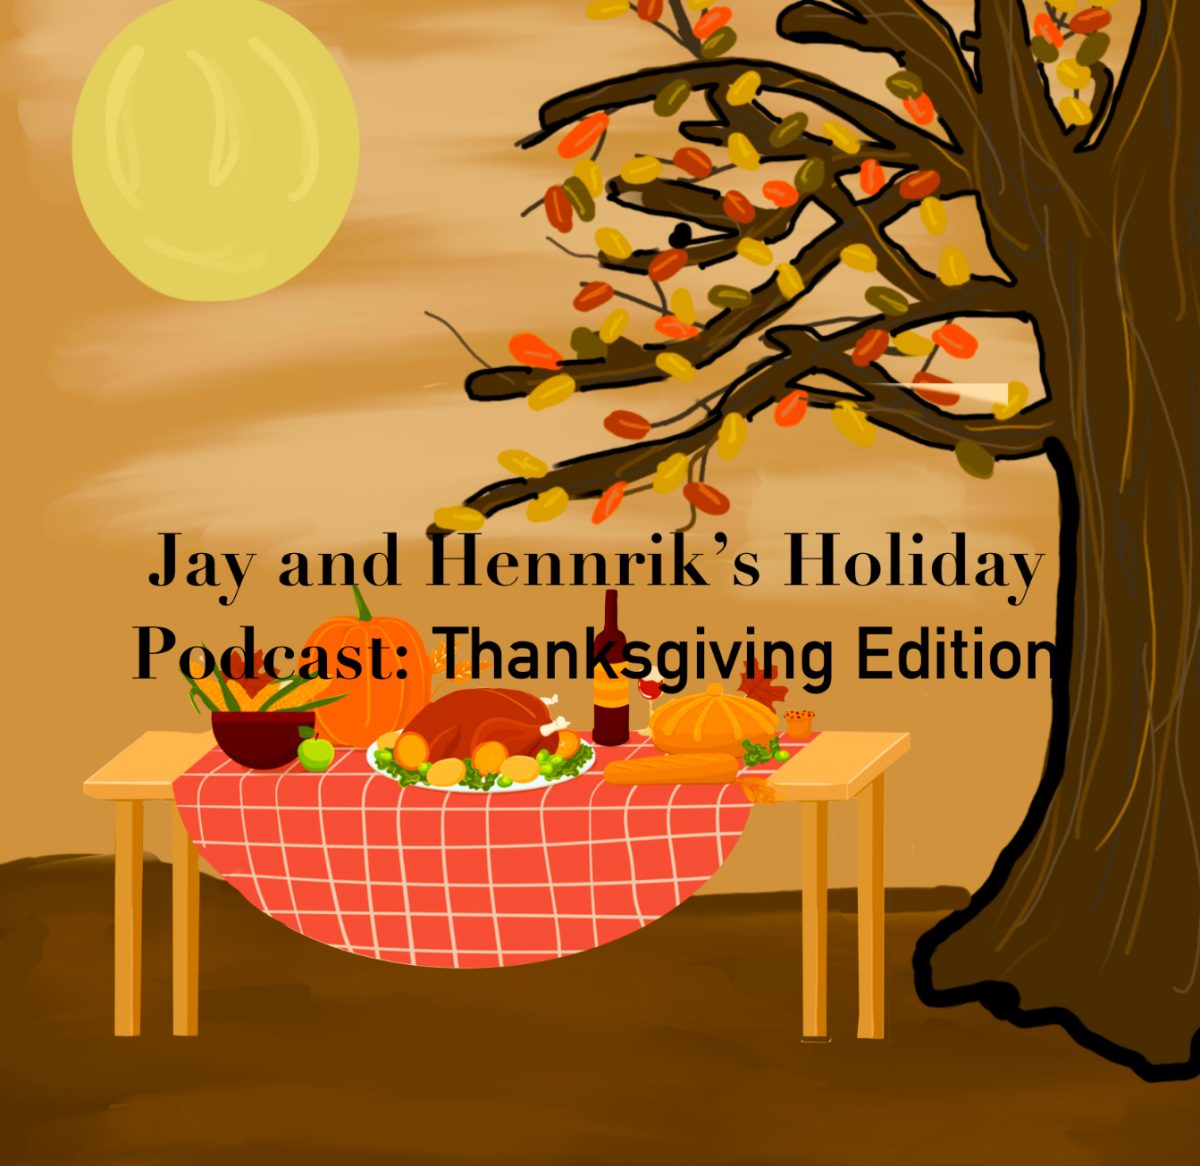 Jay and Henriks Holiday Podcast: Thanksgiving Edition